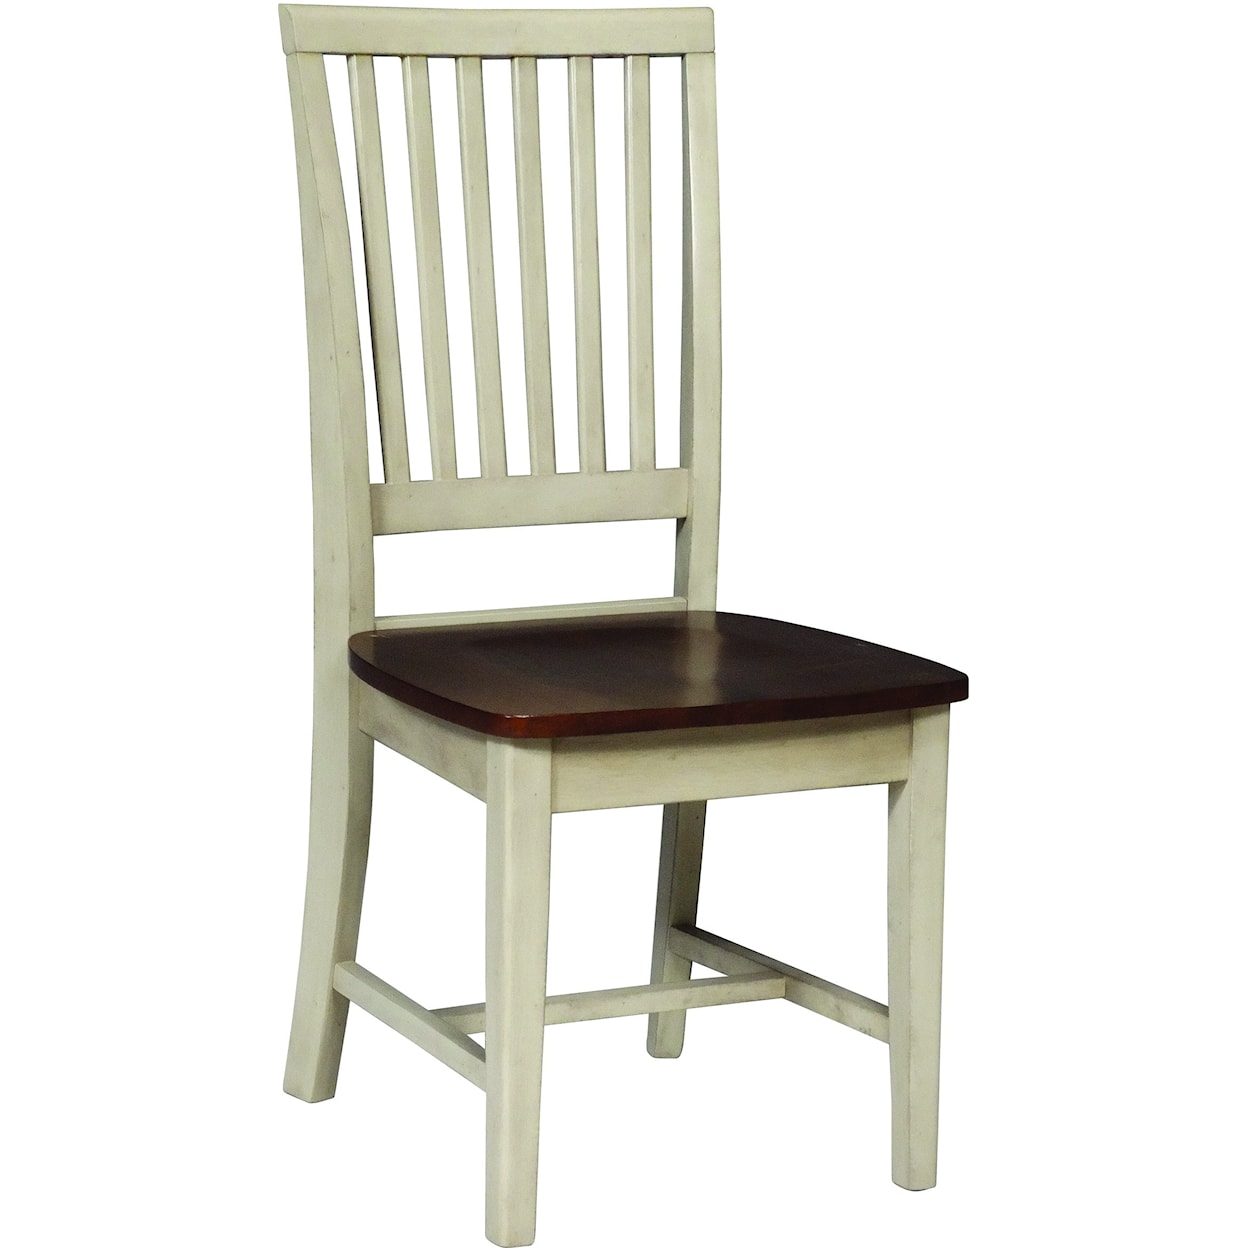 John Thomas Dining Essentials Mission Side Chair in Almond/Espresso